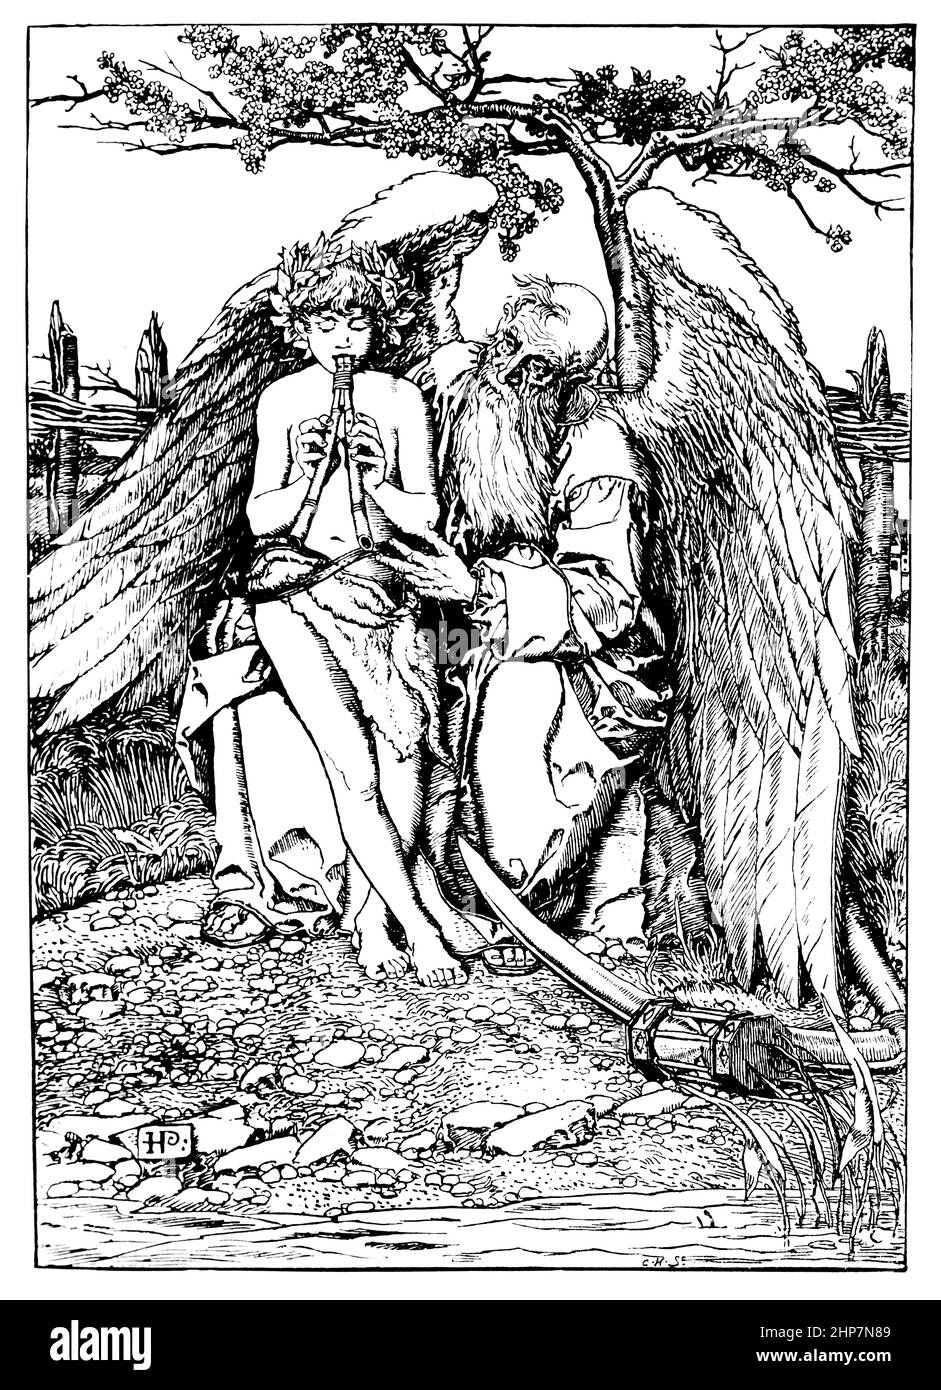 Angel and shepherd boy playing aulos double pipe flute, frontispiece, illustration, by Howard Pyle, from The Wonder Clock Four and Twenty Marvelous Ta Stock Photo